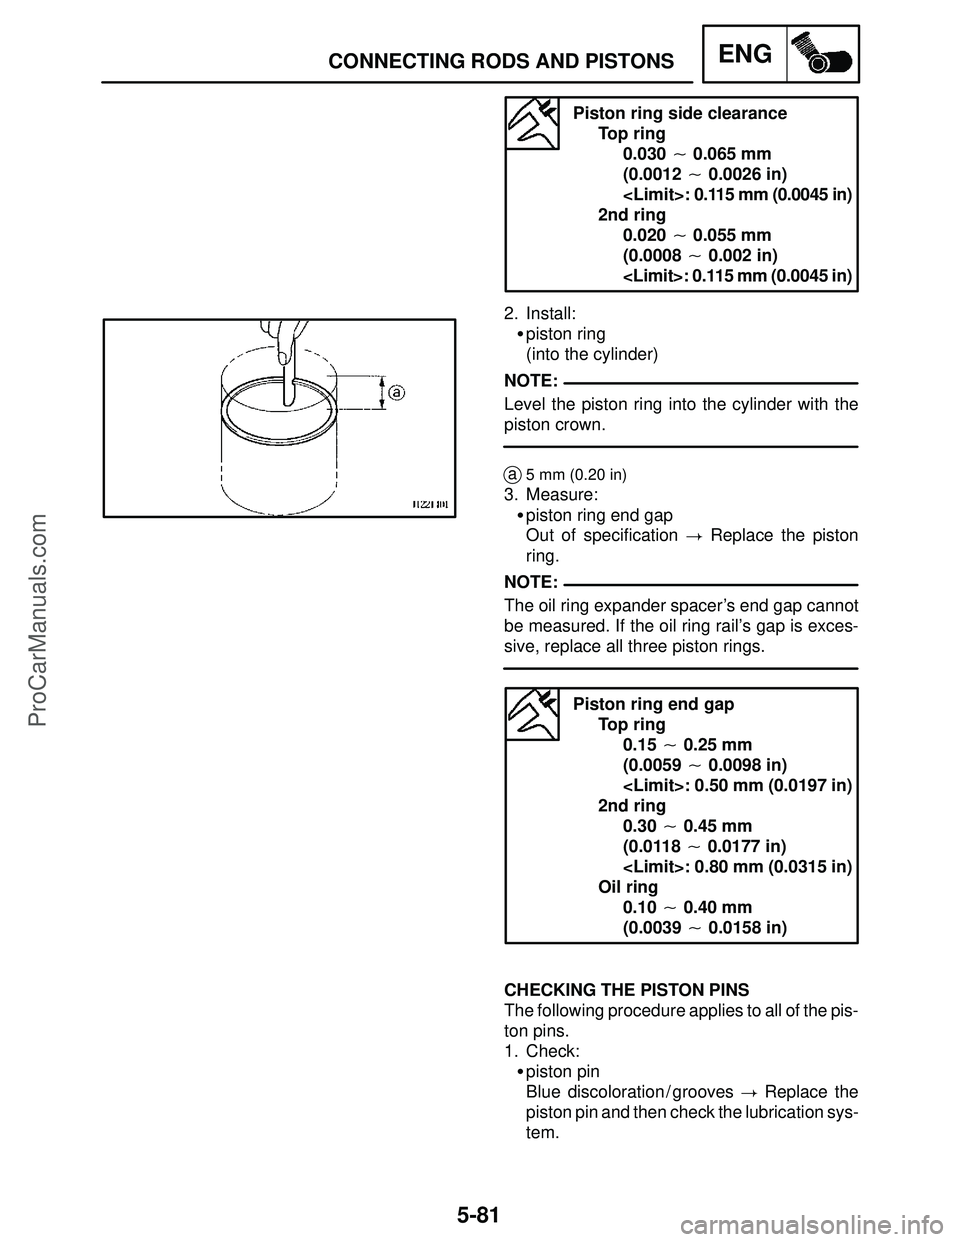 YAMAHA YZF-R1S 2004  Service Manual 5-81
CONNECTING RODS AND PISTONSENG
NOTE:
NOTE:
Piston ring side clearance
Top ring
0.030  0.065 mm 
(0.0012  0.0026 in)
<Limit>: 0.115 mm (0.0045 in)
2nd ring
0.020  0.055 mm
(0.0008  0.002 in)
<